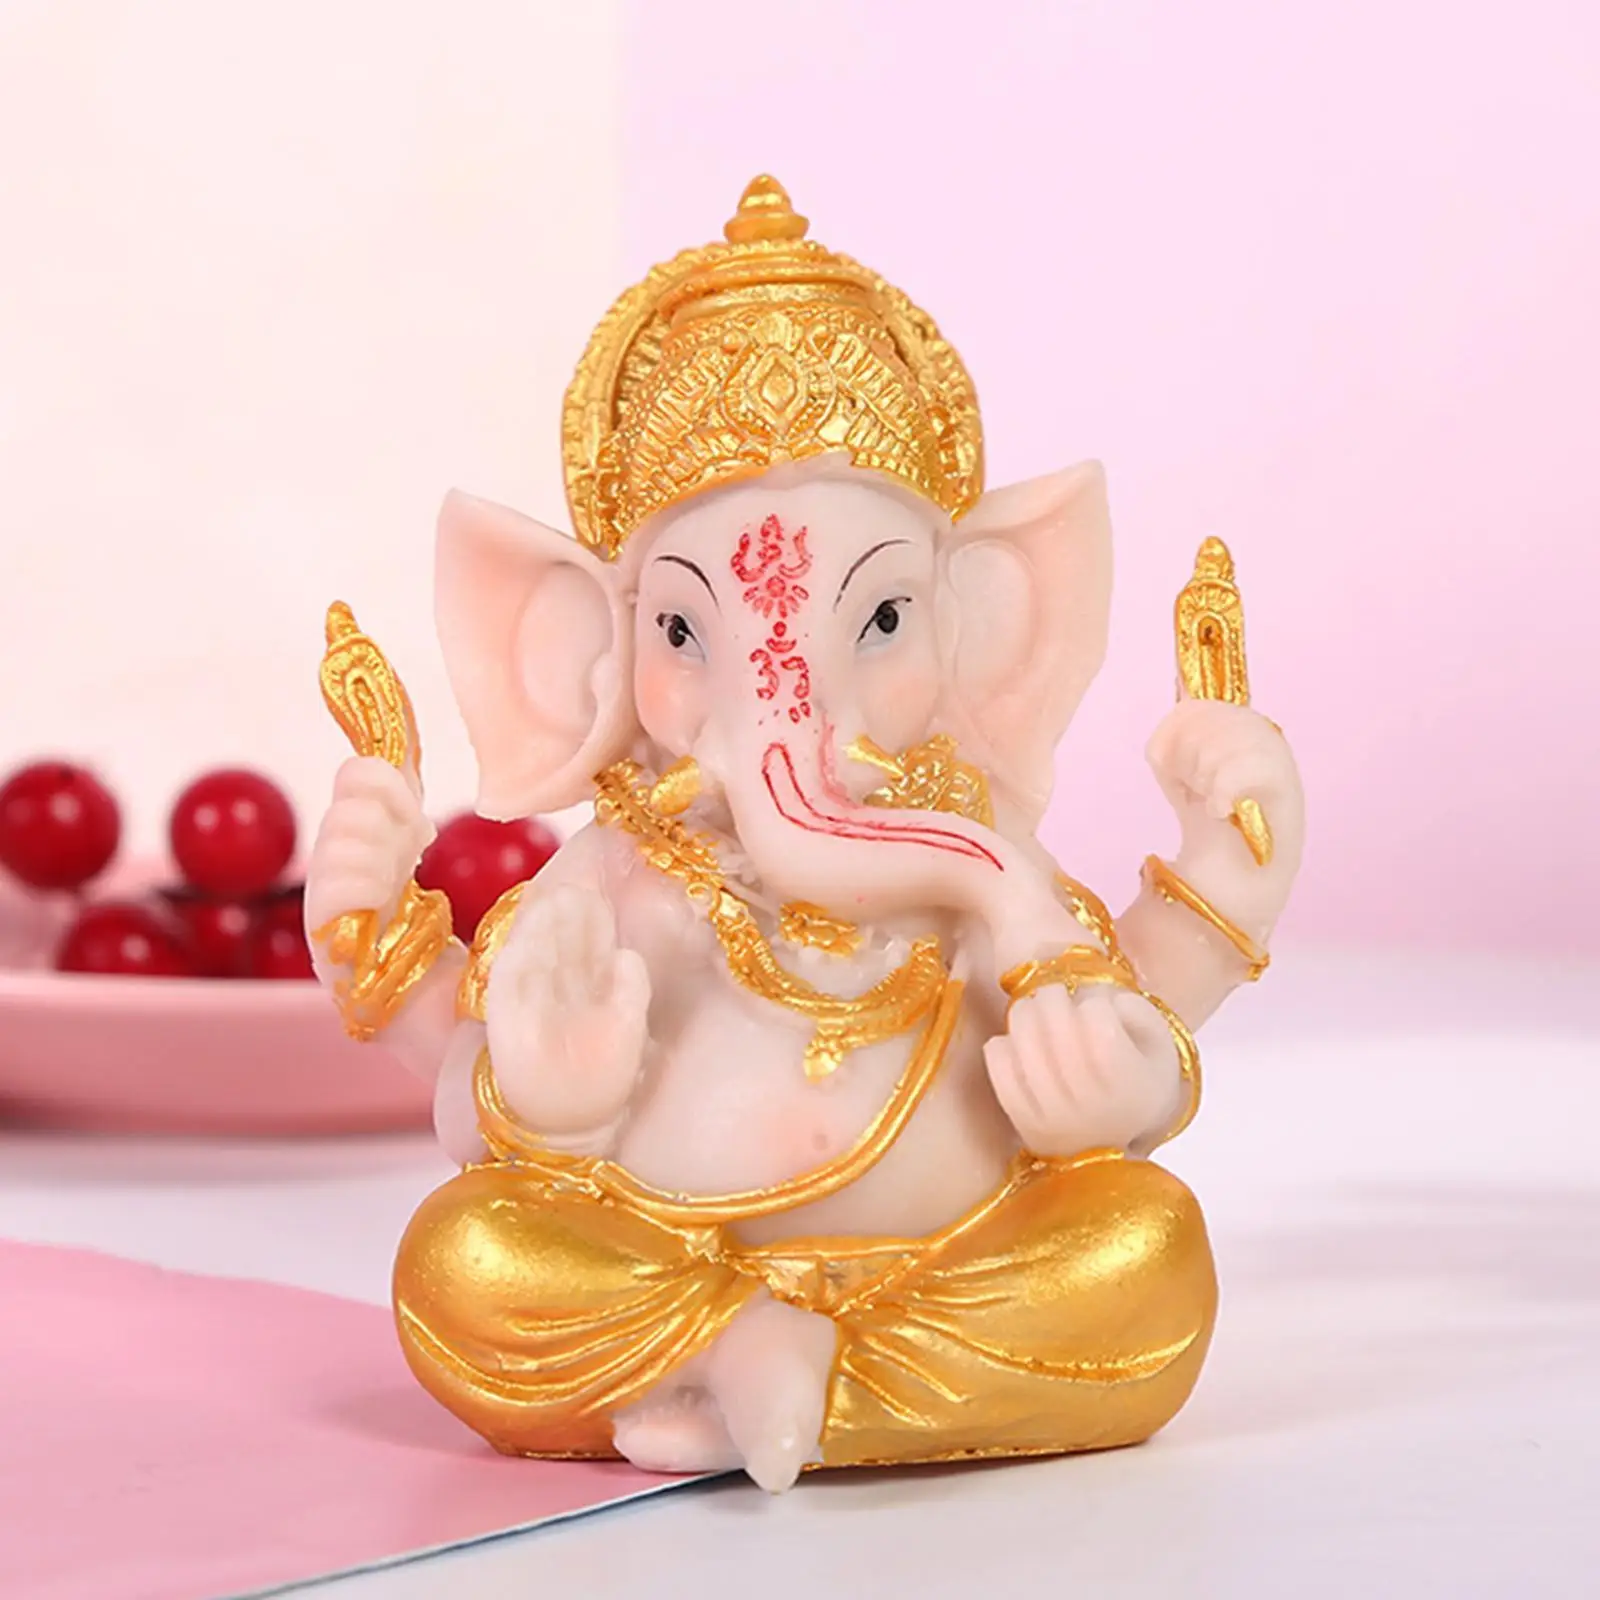  Sculpture  Statue Fengshui Resin Buddha Lucky Business Wealth Indian  Figurine for Office Shop Temple Home Ornaments